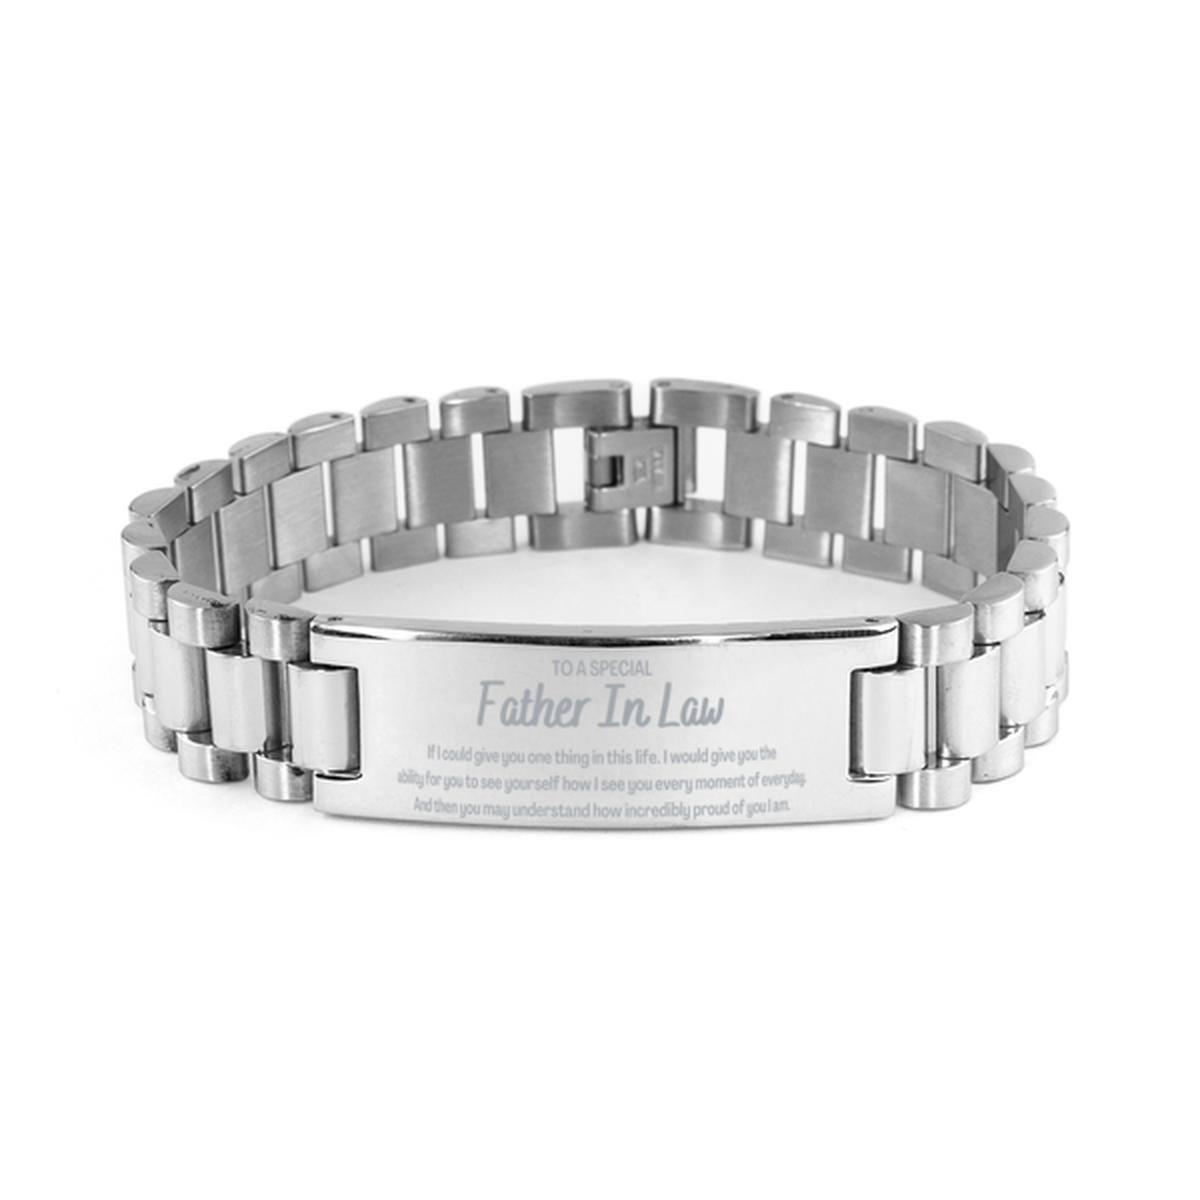 To My Father In Law Ladder Stainless Steel Bracelet, Gifts For Father In Law Engraved, Inspirational Gifts for Christmas Birthday, Epic Gifts for Father In Law To A Special Father In Law how incredibly proud of you I am